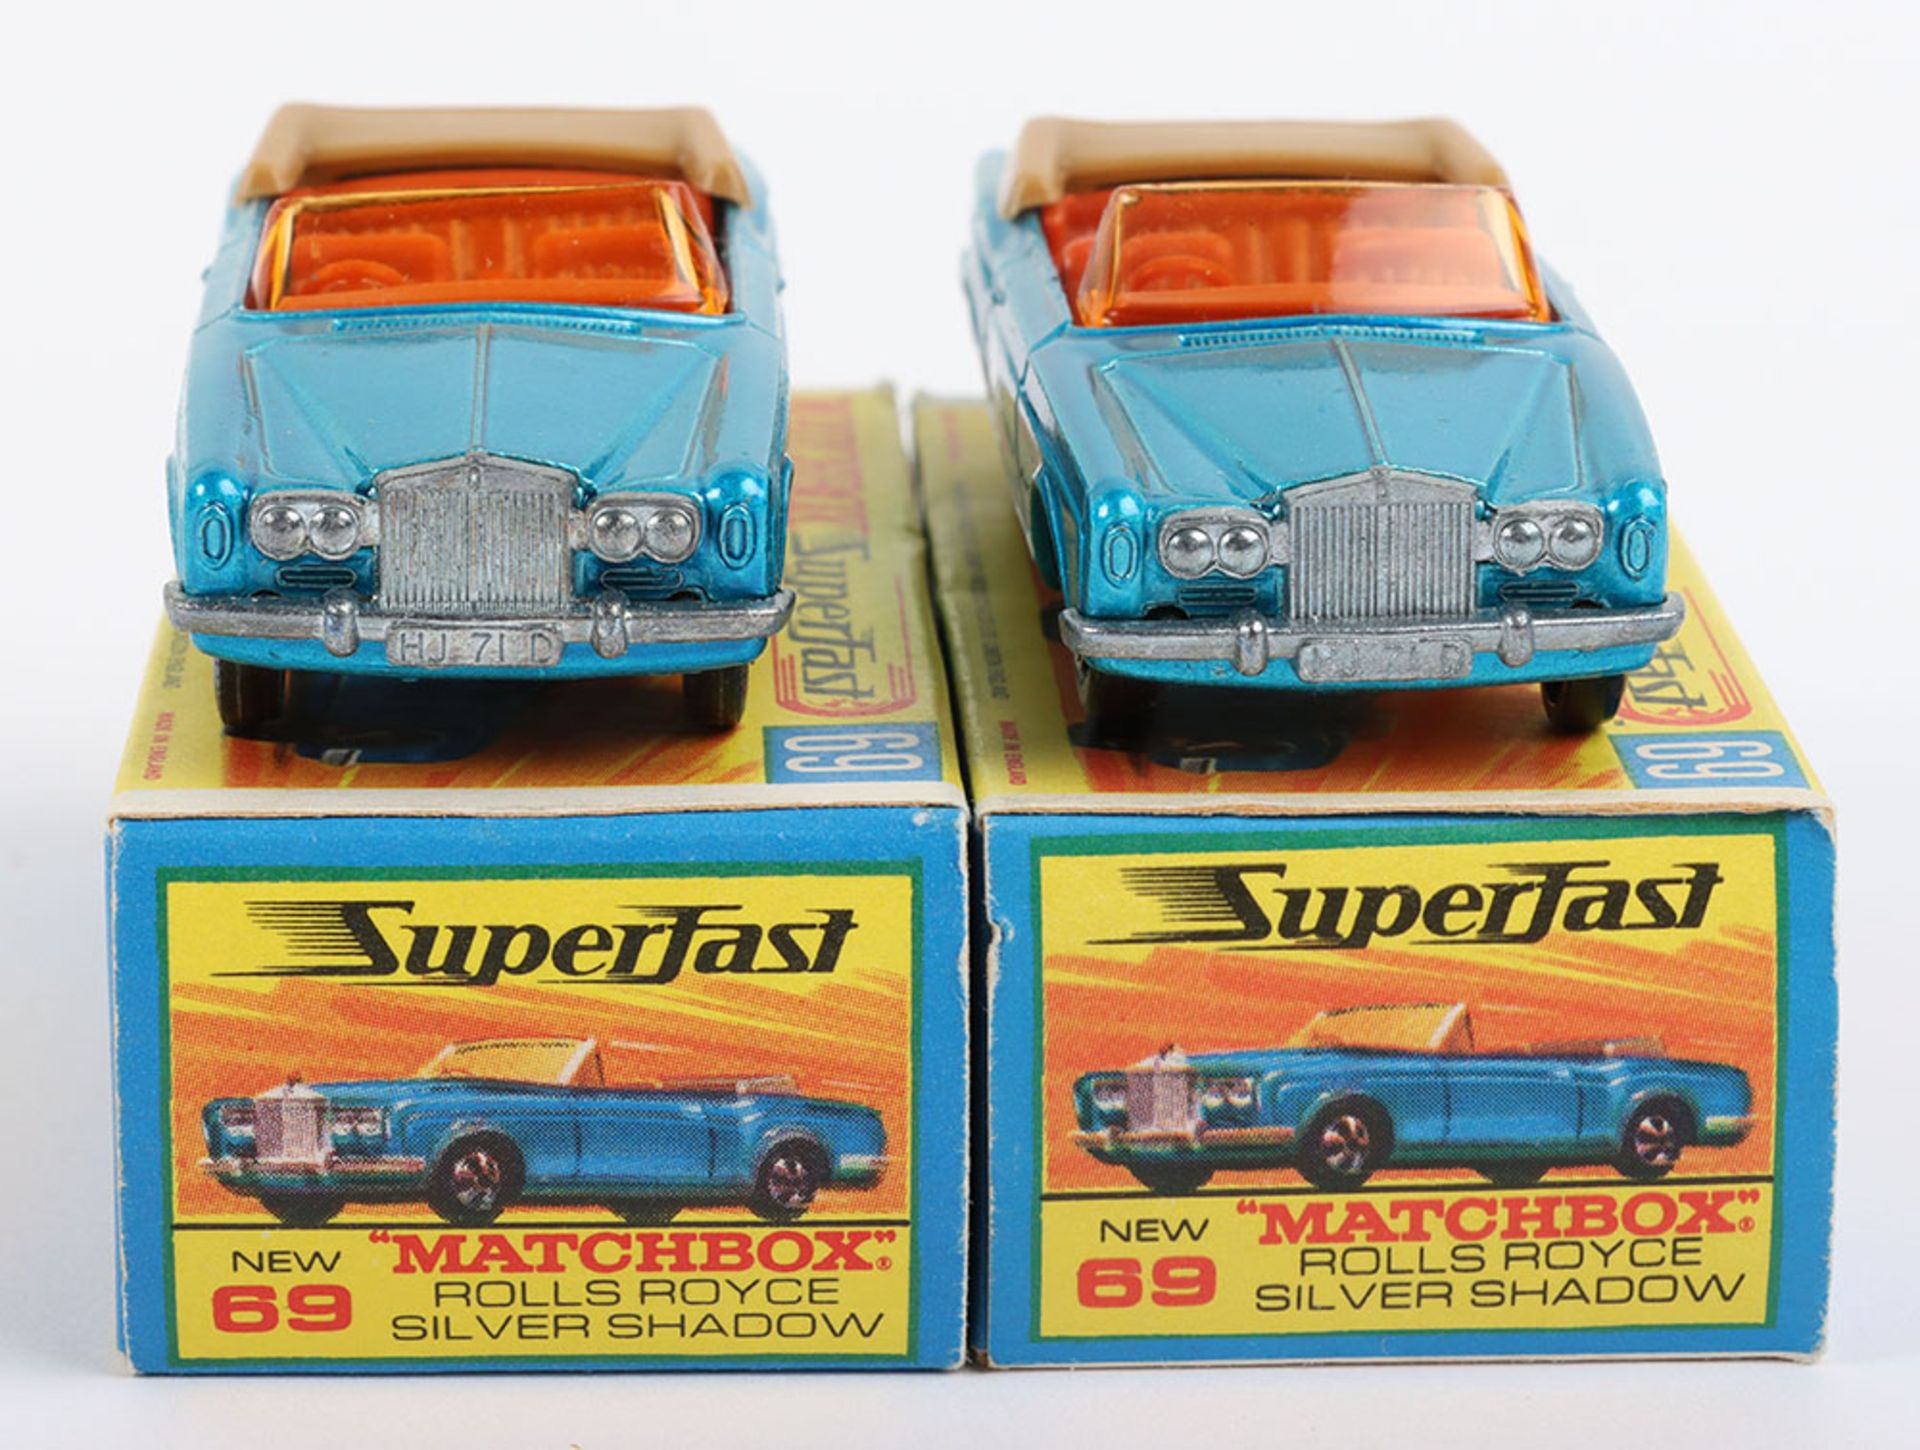 Two Boxed Matchbox Lesney Superfast 69c Rolls Royce Silver Shadow Models - Image 3 of 5